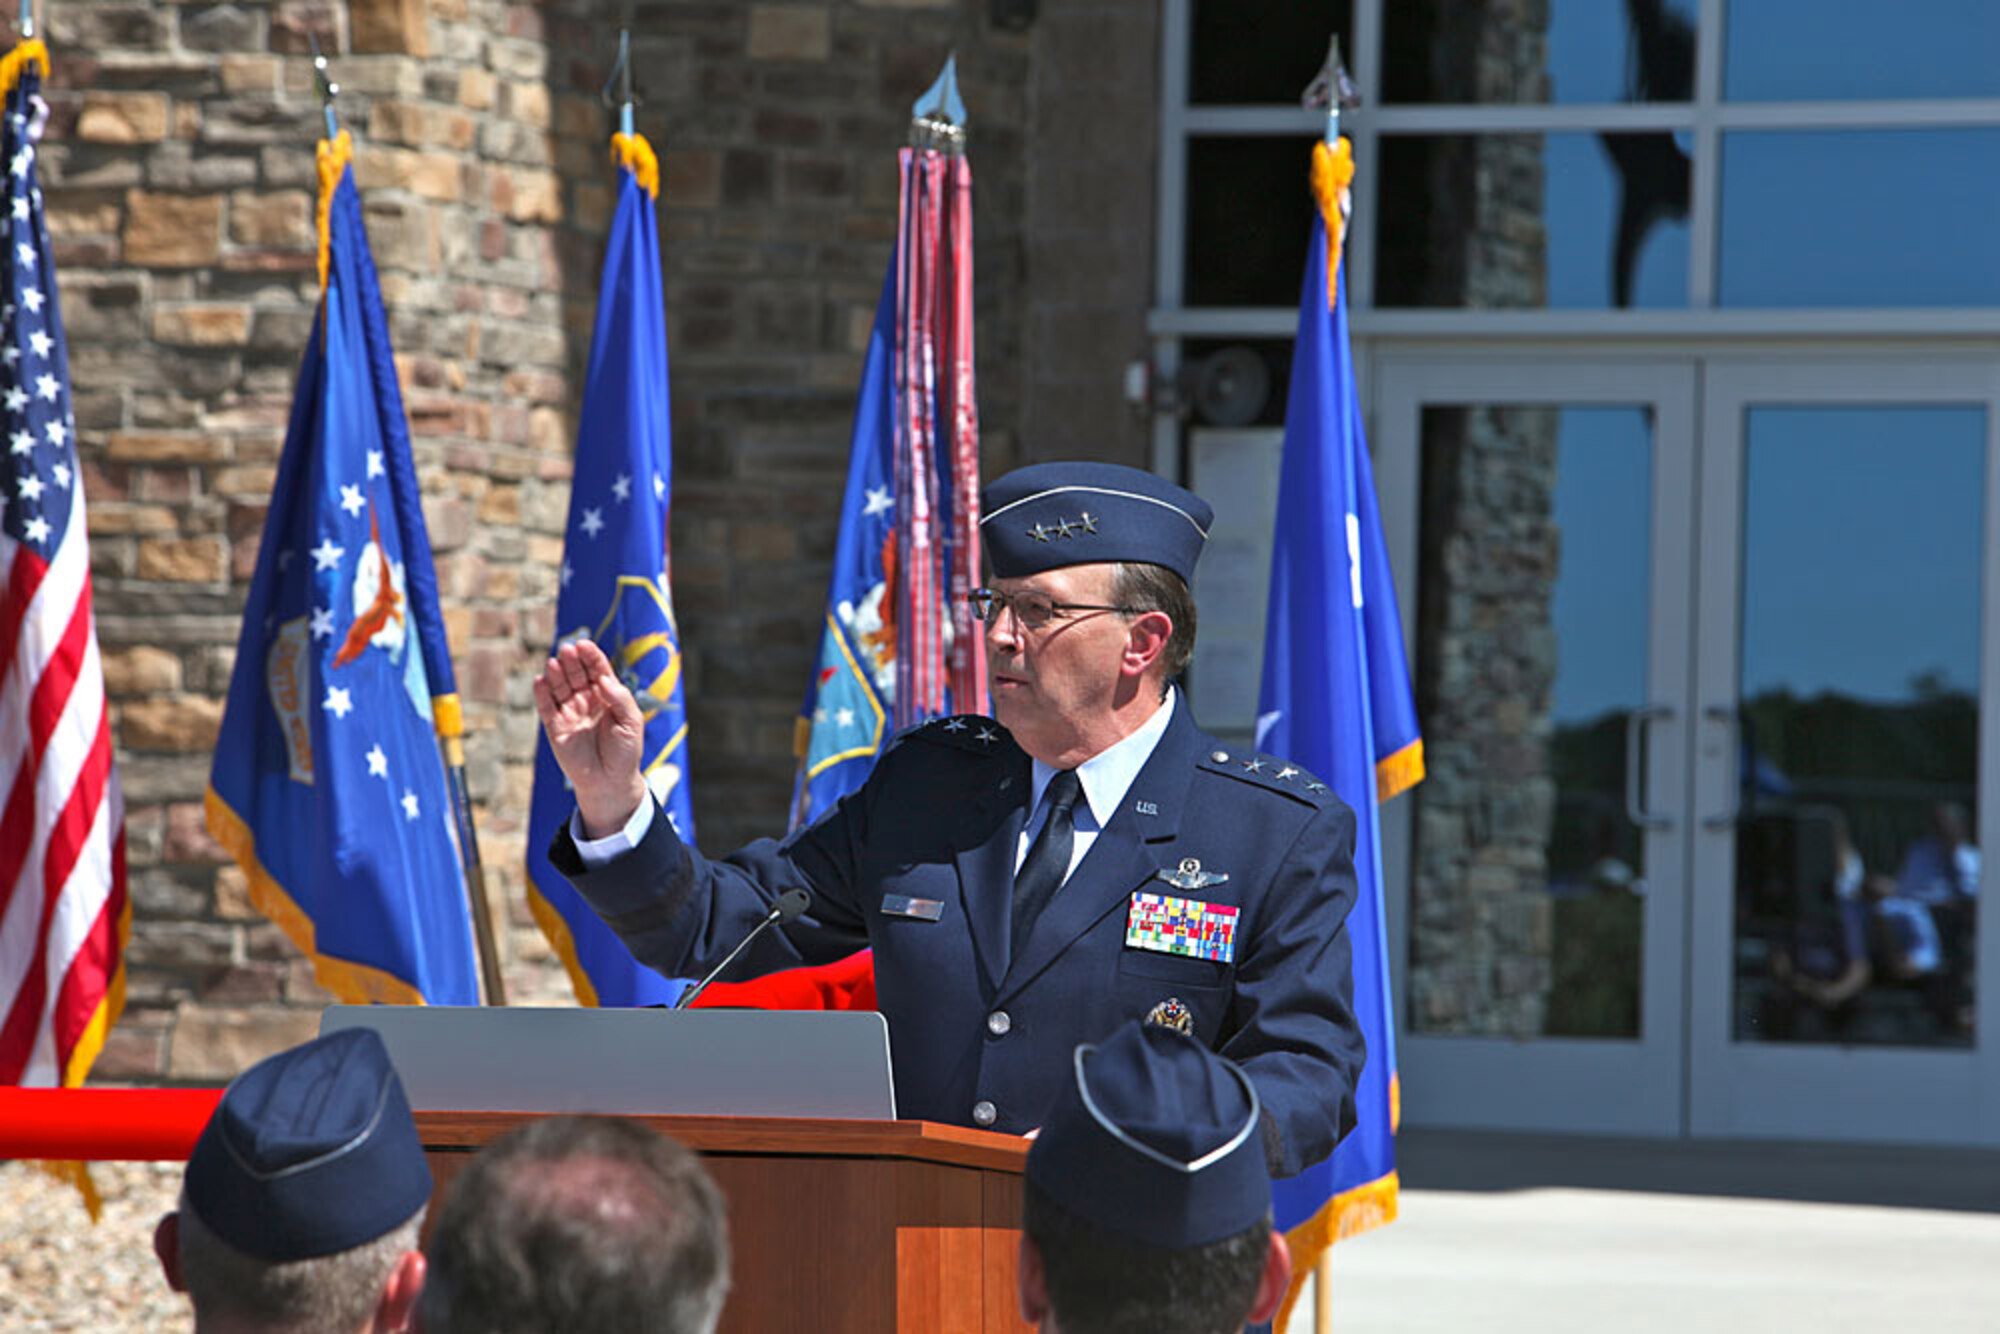 Lt. Gen. Charles E. Stenner Jr., commander of Air Force Reserve Command, speaks at the ceremony for the new Air Reserve Personnel Center July 19 at Buckley Air Force Base, Colo. The 80,000-square foot facility costs $17 million. The new personnel center is the first large-scale green facility in Air Force Reserve Command. (U.S. Air Force photo/Quinn Jacobson)